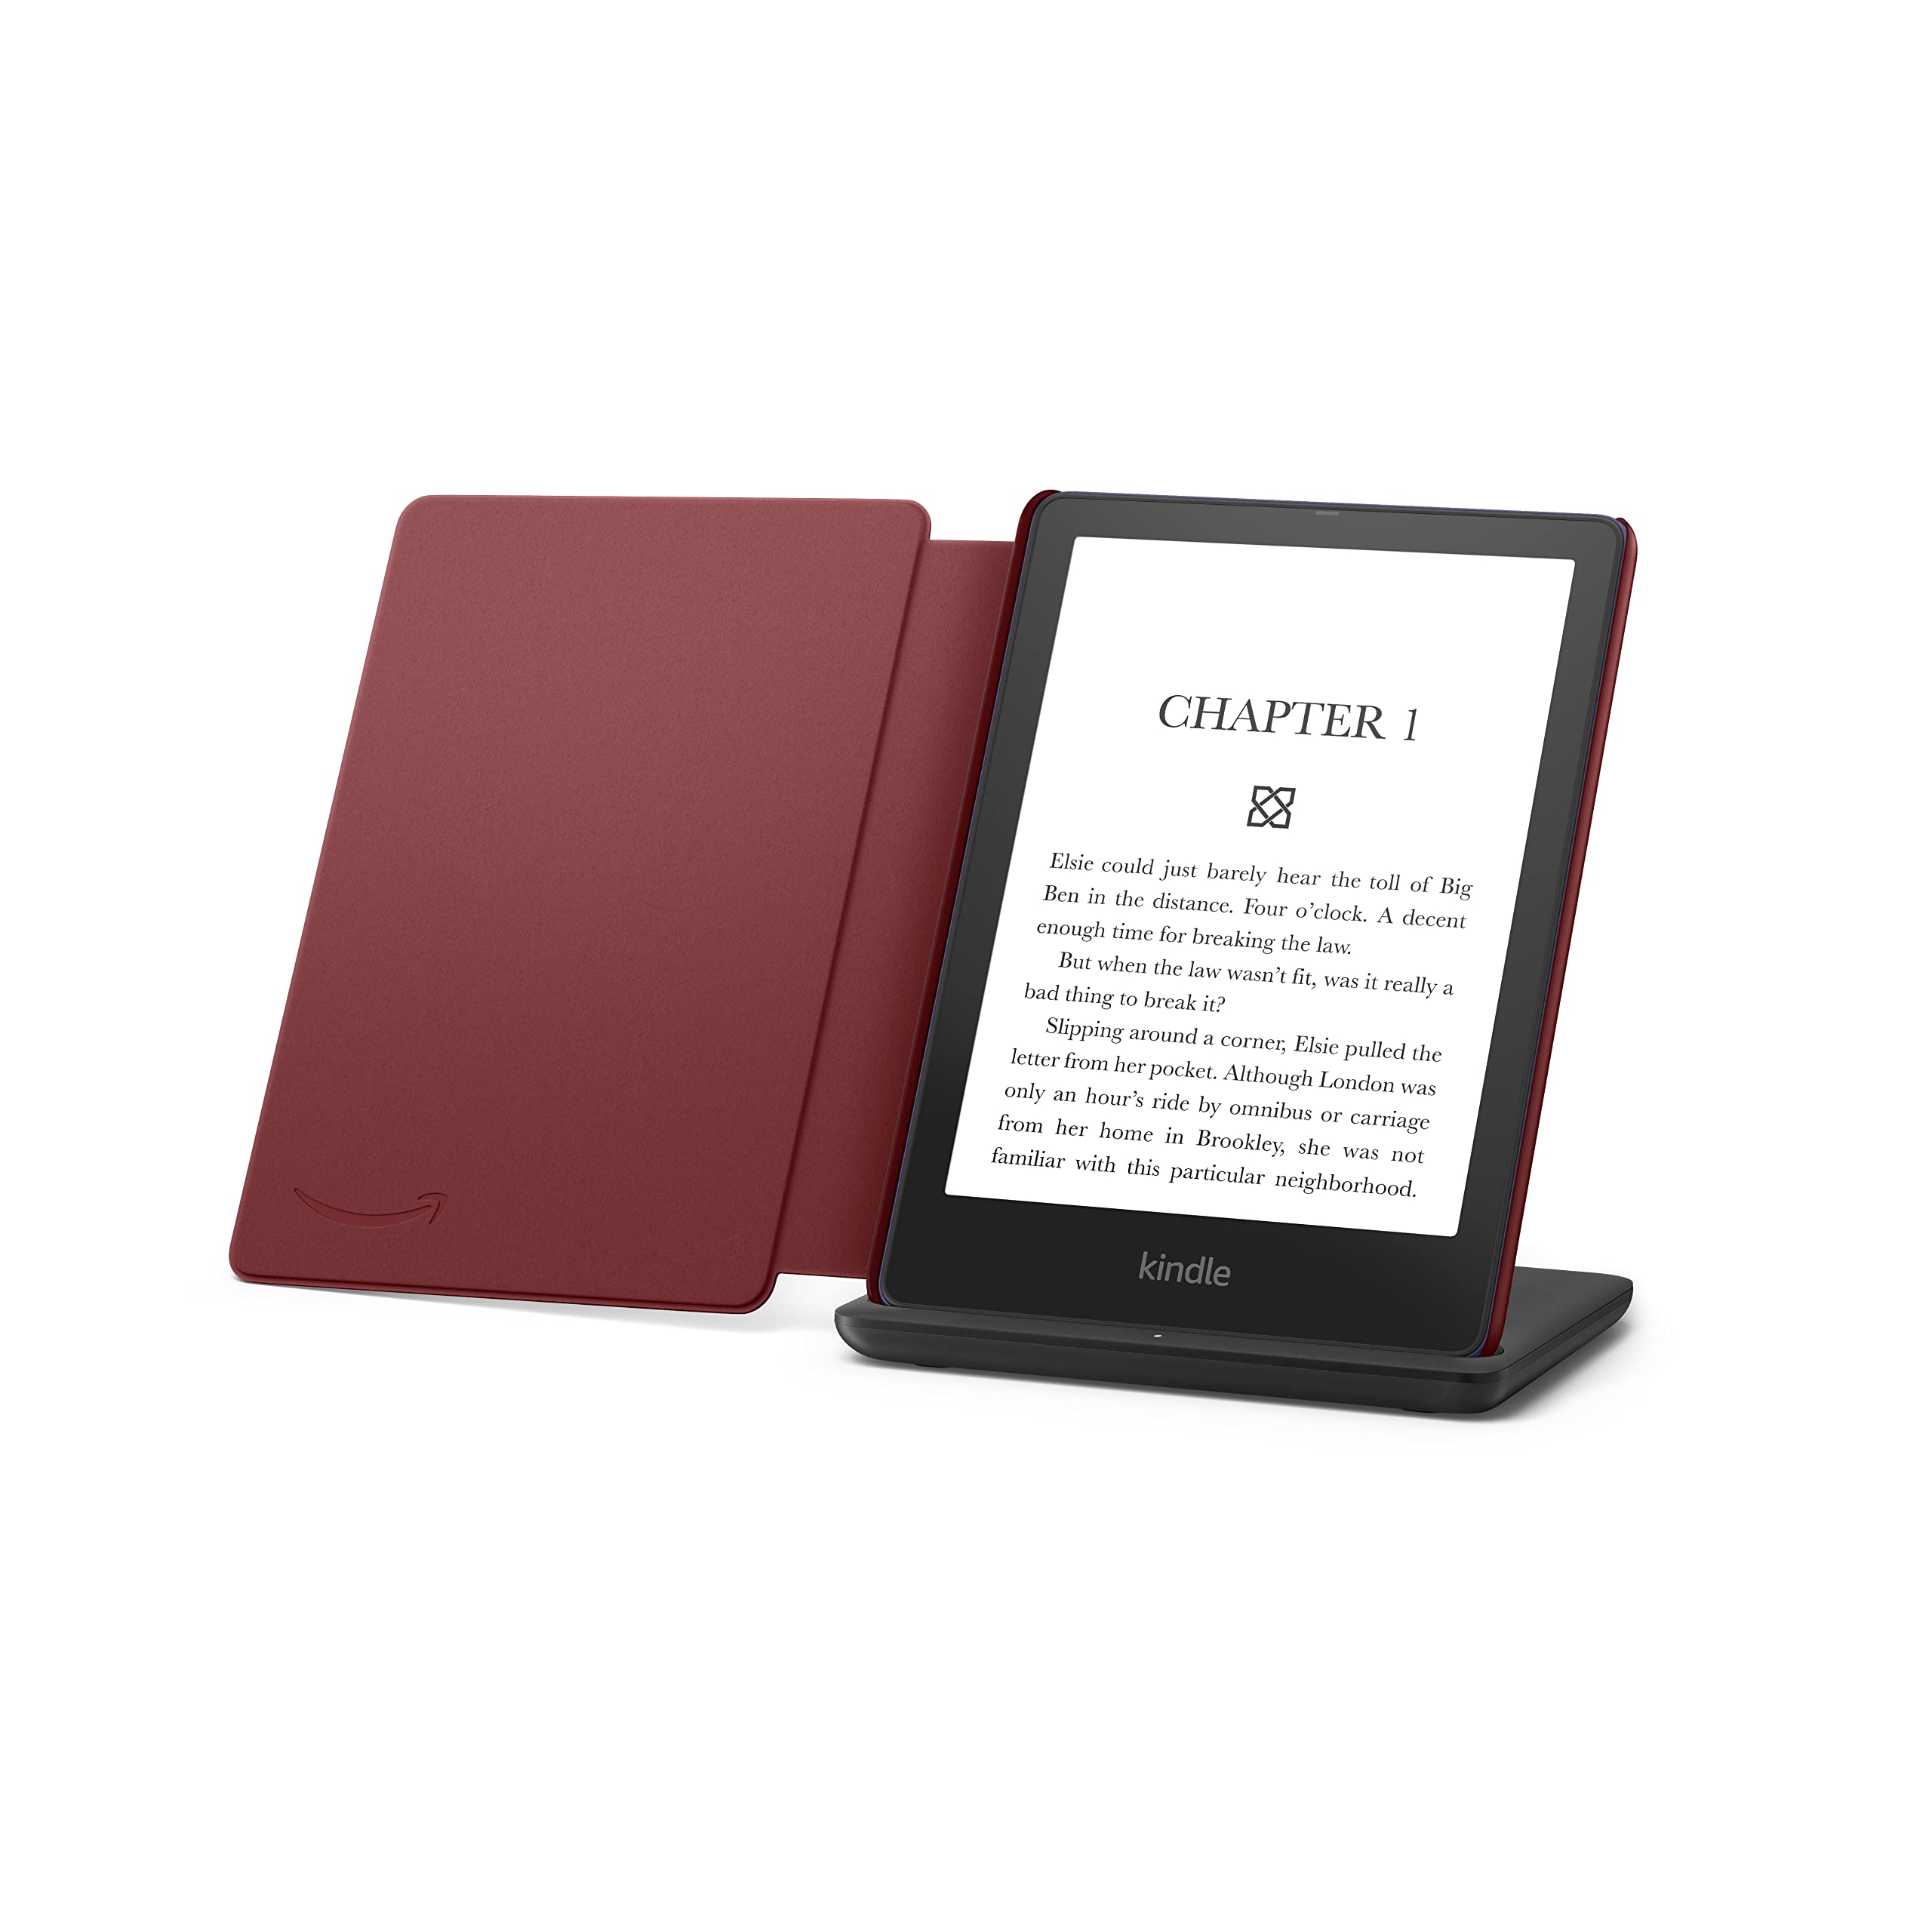 Kindle Paperwhite Signature Edition including Kindle Paperwhite (32 GB) - Denim - Without Lockscreen Ads, Leather Cover - Merlot, and Wireless Charging Dock